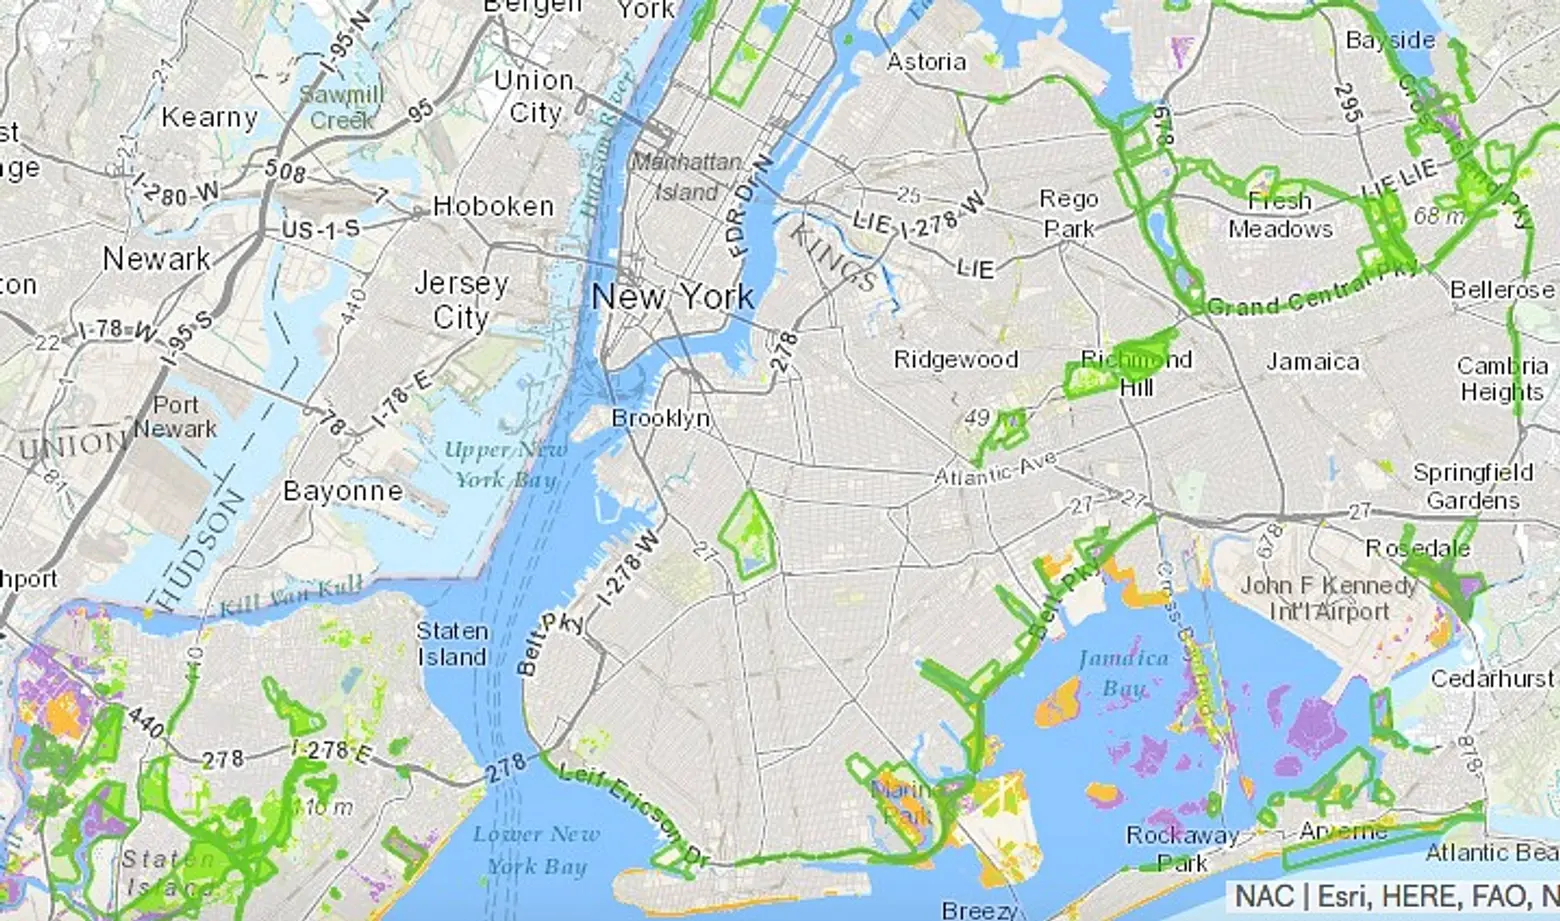 Explore Over 10,000 Acres of NYC Parkland With This Interactive Map